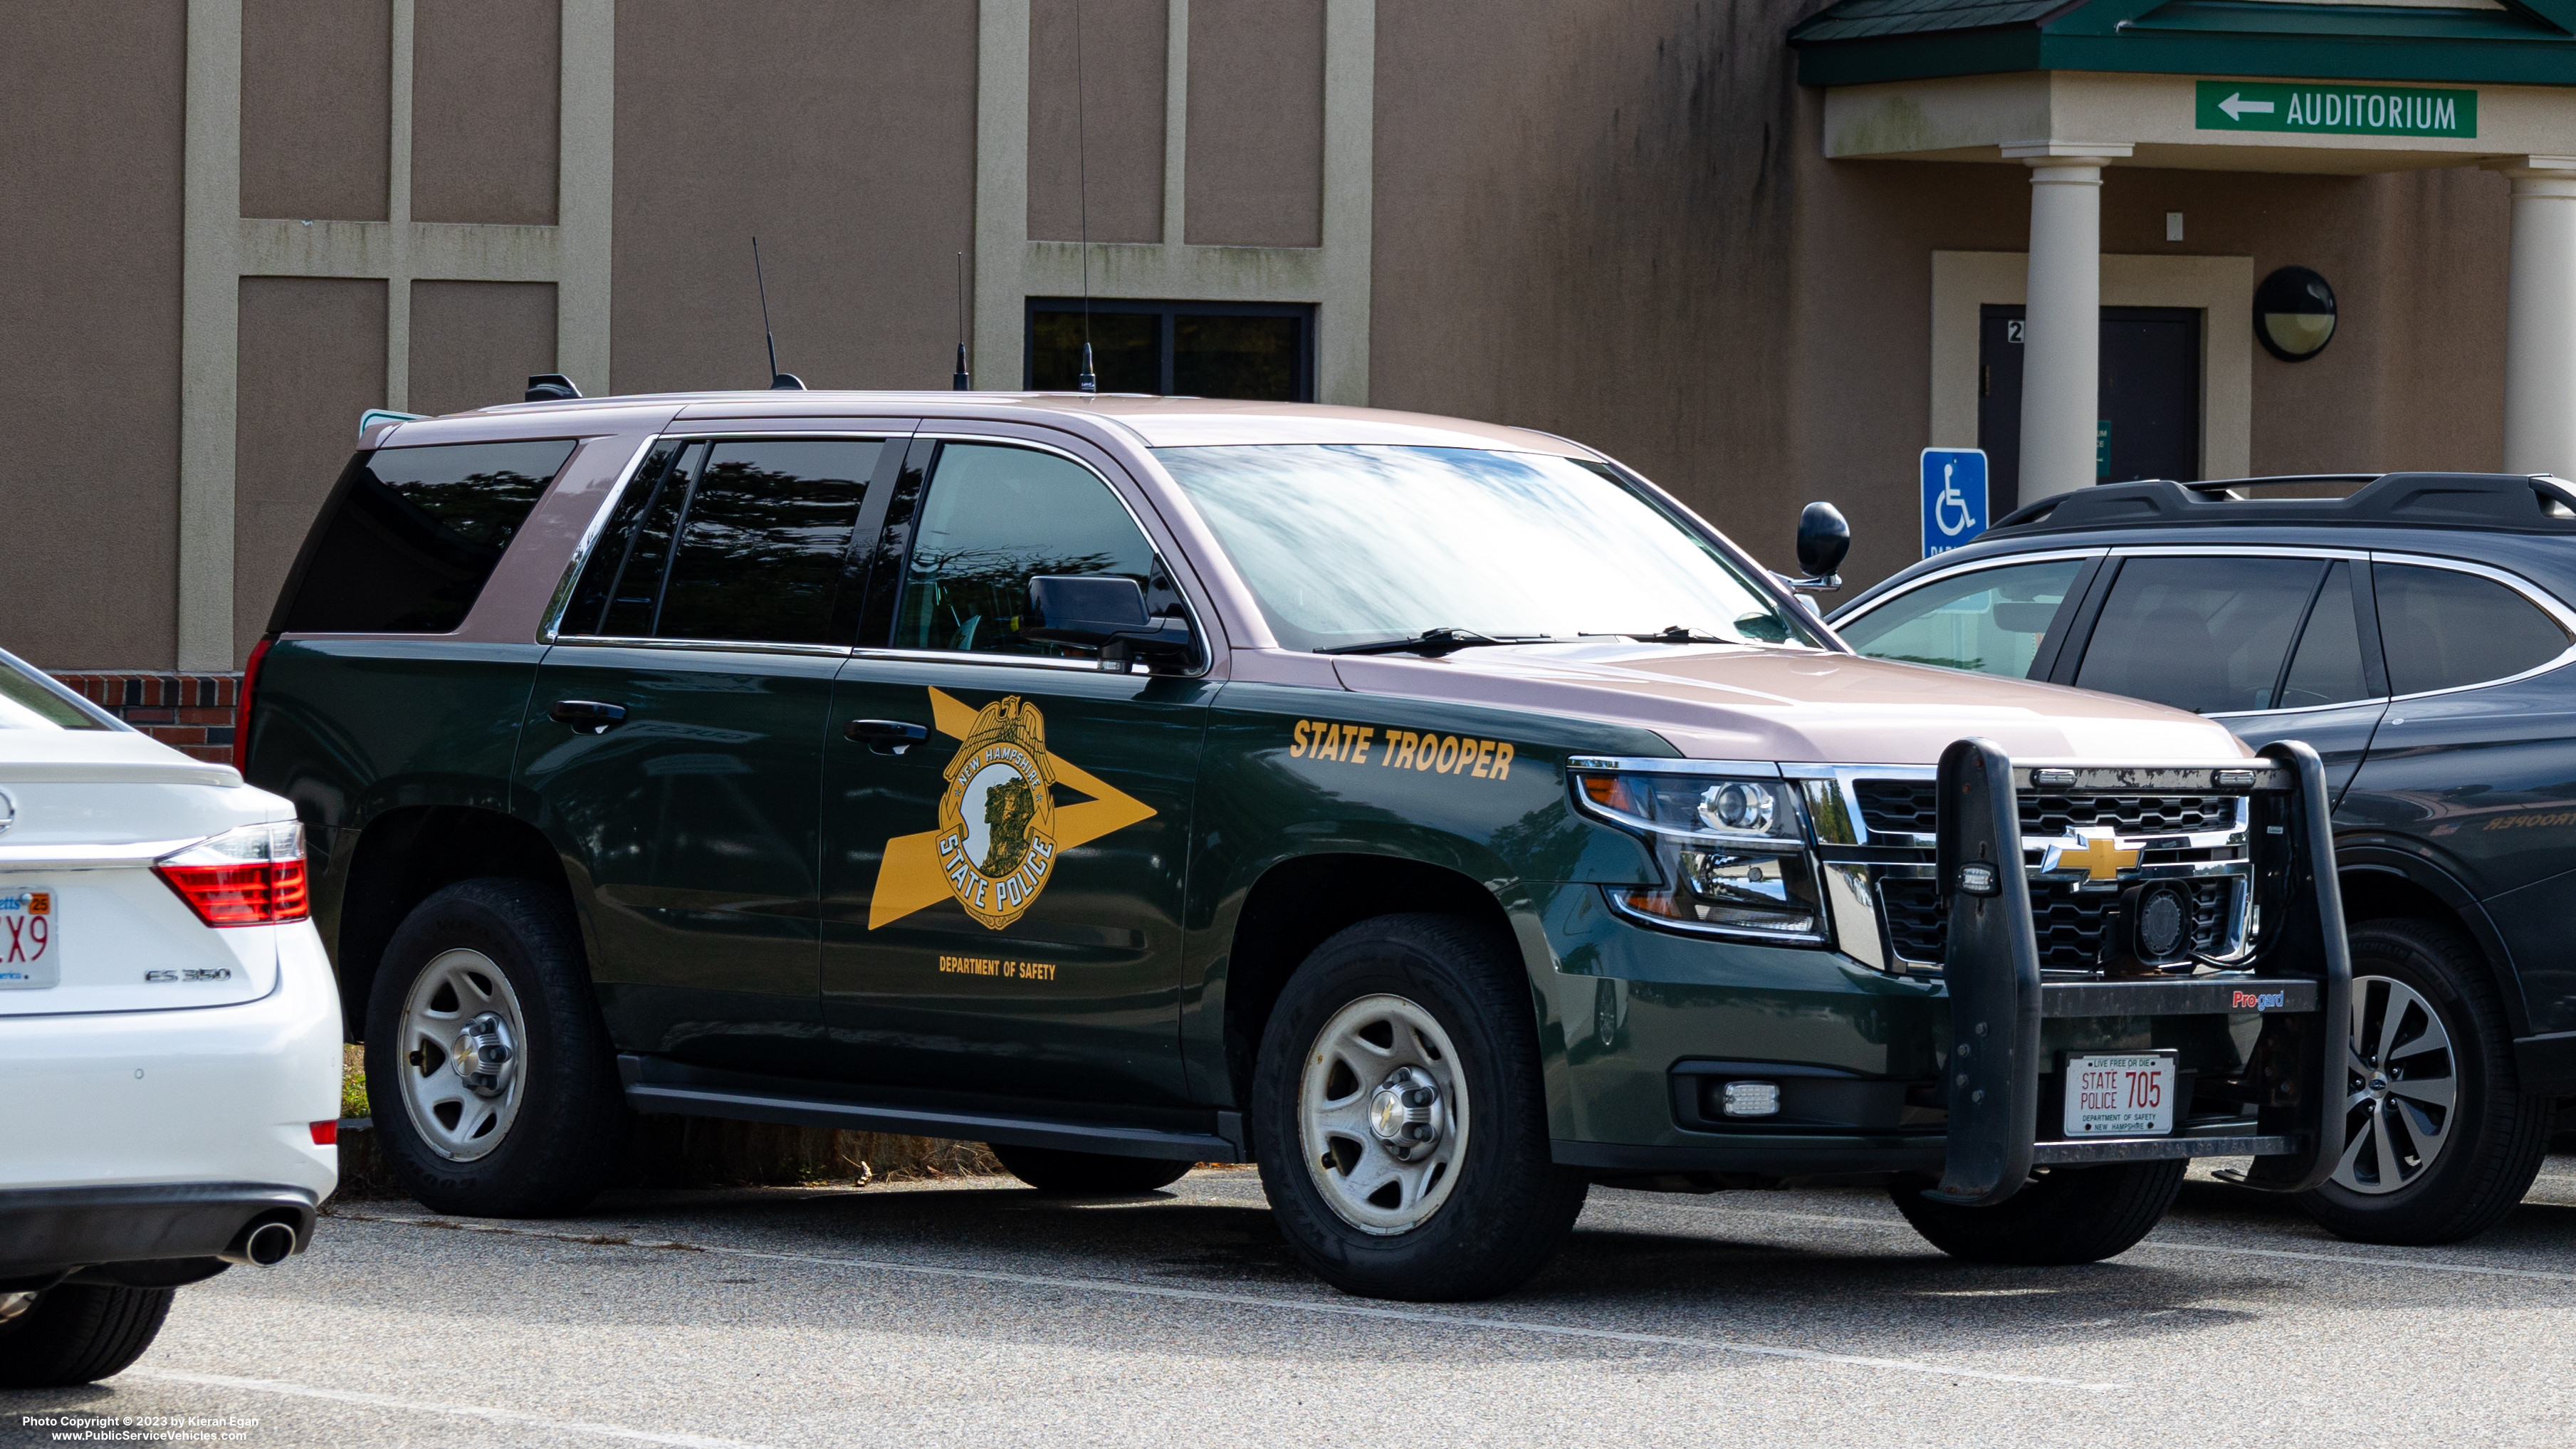 A photo  of New Hampshire State Police
            Cruiser 705, a 2017-2019 Chevrolet Tahoe             taken by Kieran Egan